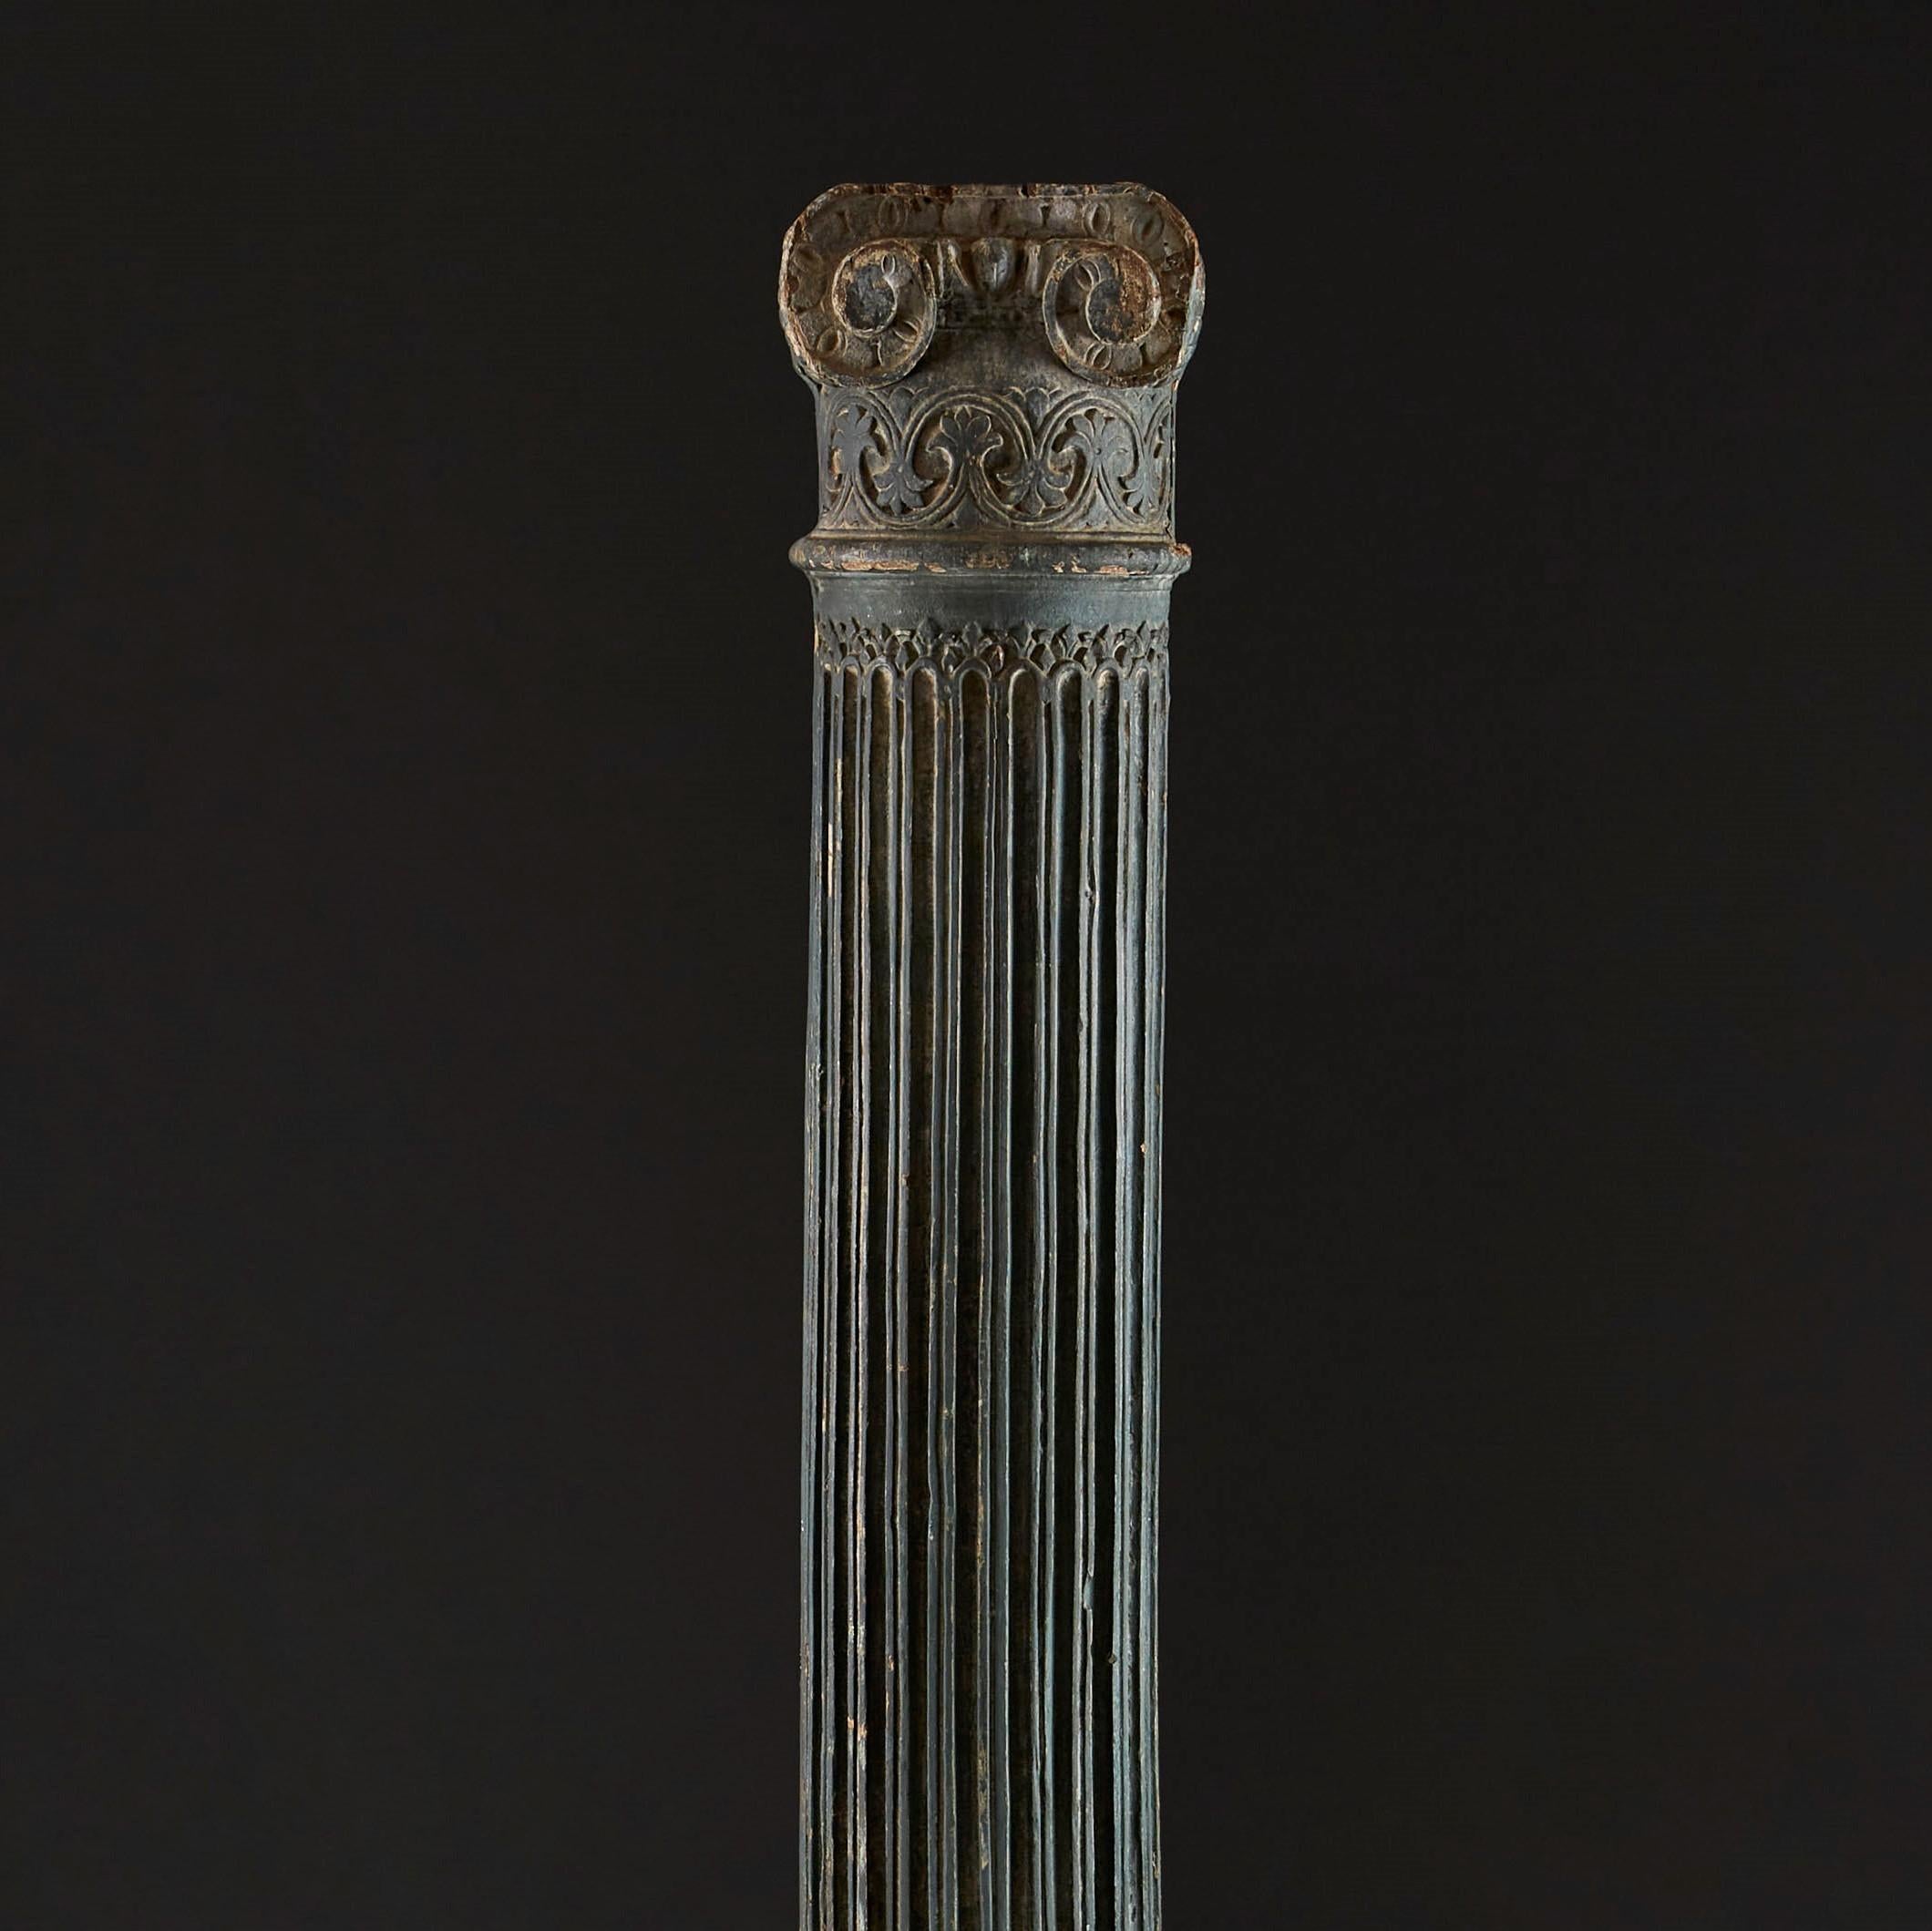 A rare Prussian blue carved wood and painted ionic column of large scale, with scrolled ionic capitol and fluted column, with original faded blue paintwork.